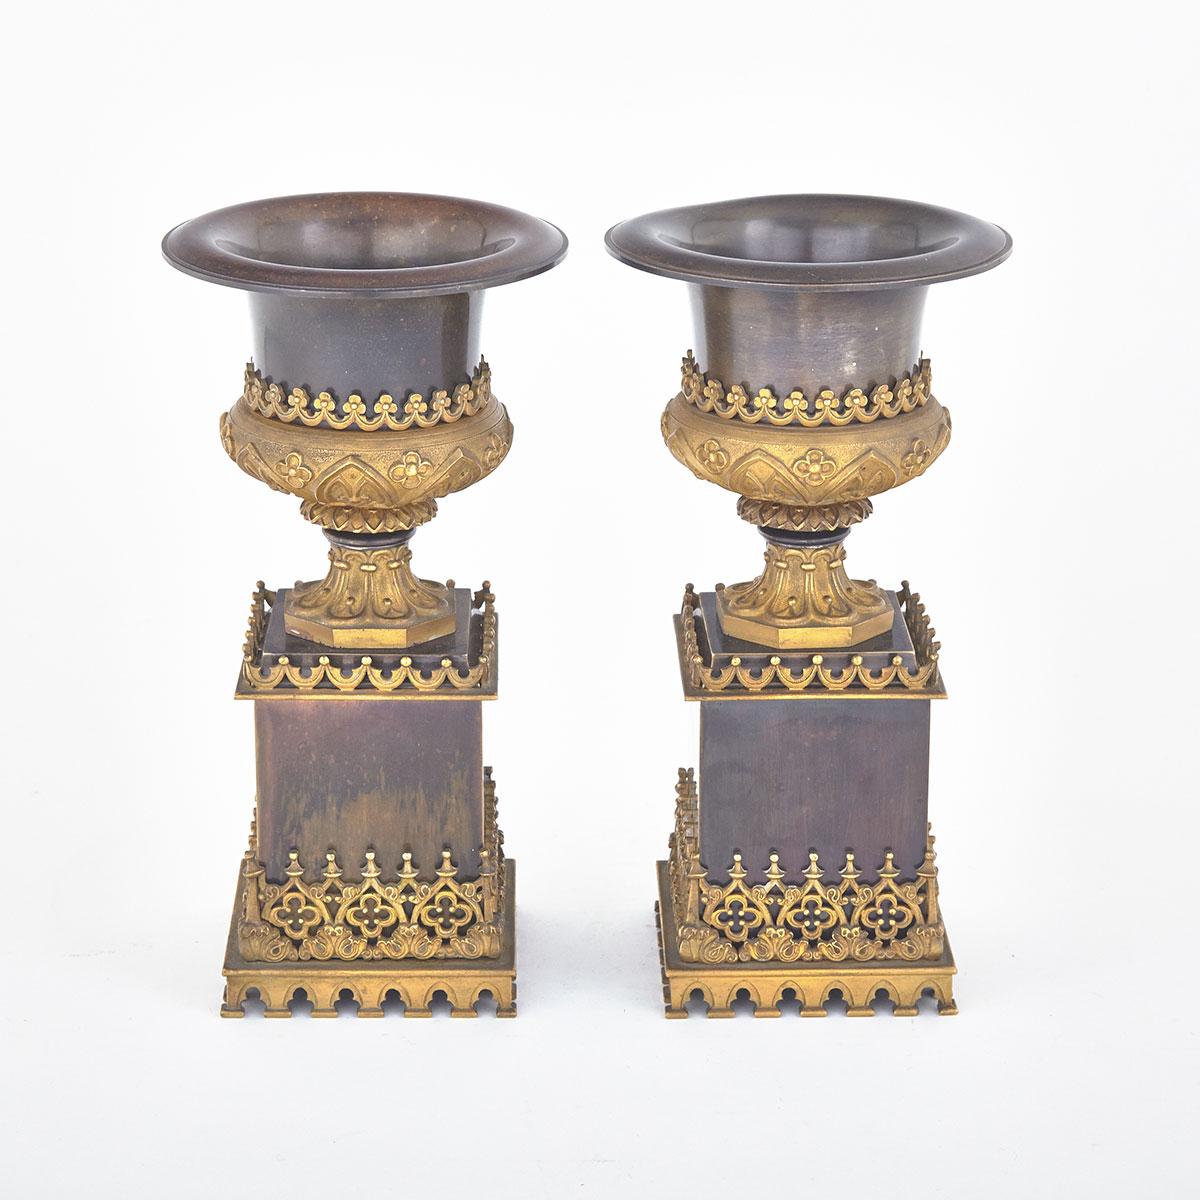 Pair of French Gothic Revival Gilt and Patinated Bronze Mantle Urns, c.1840